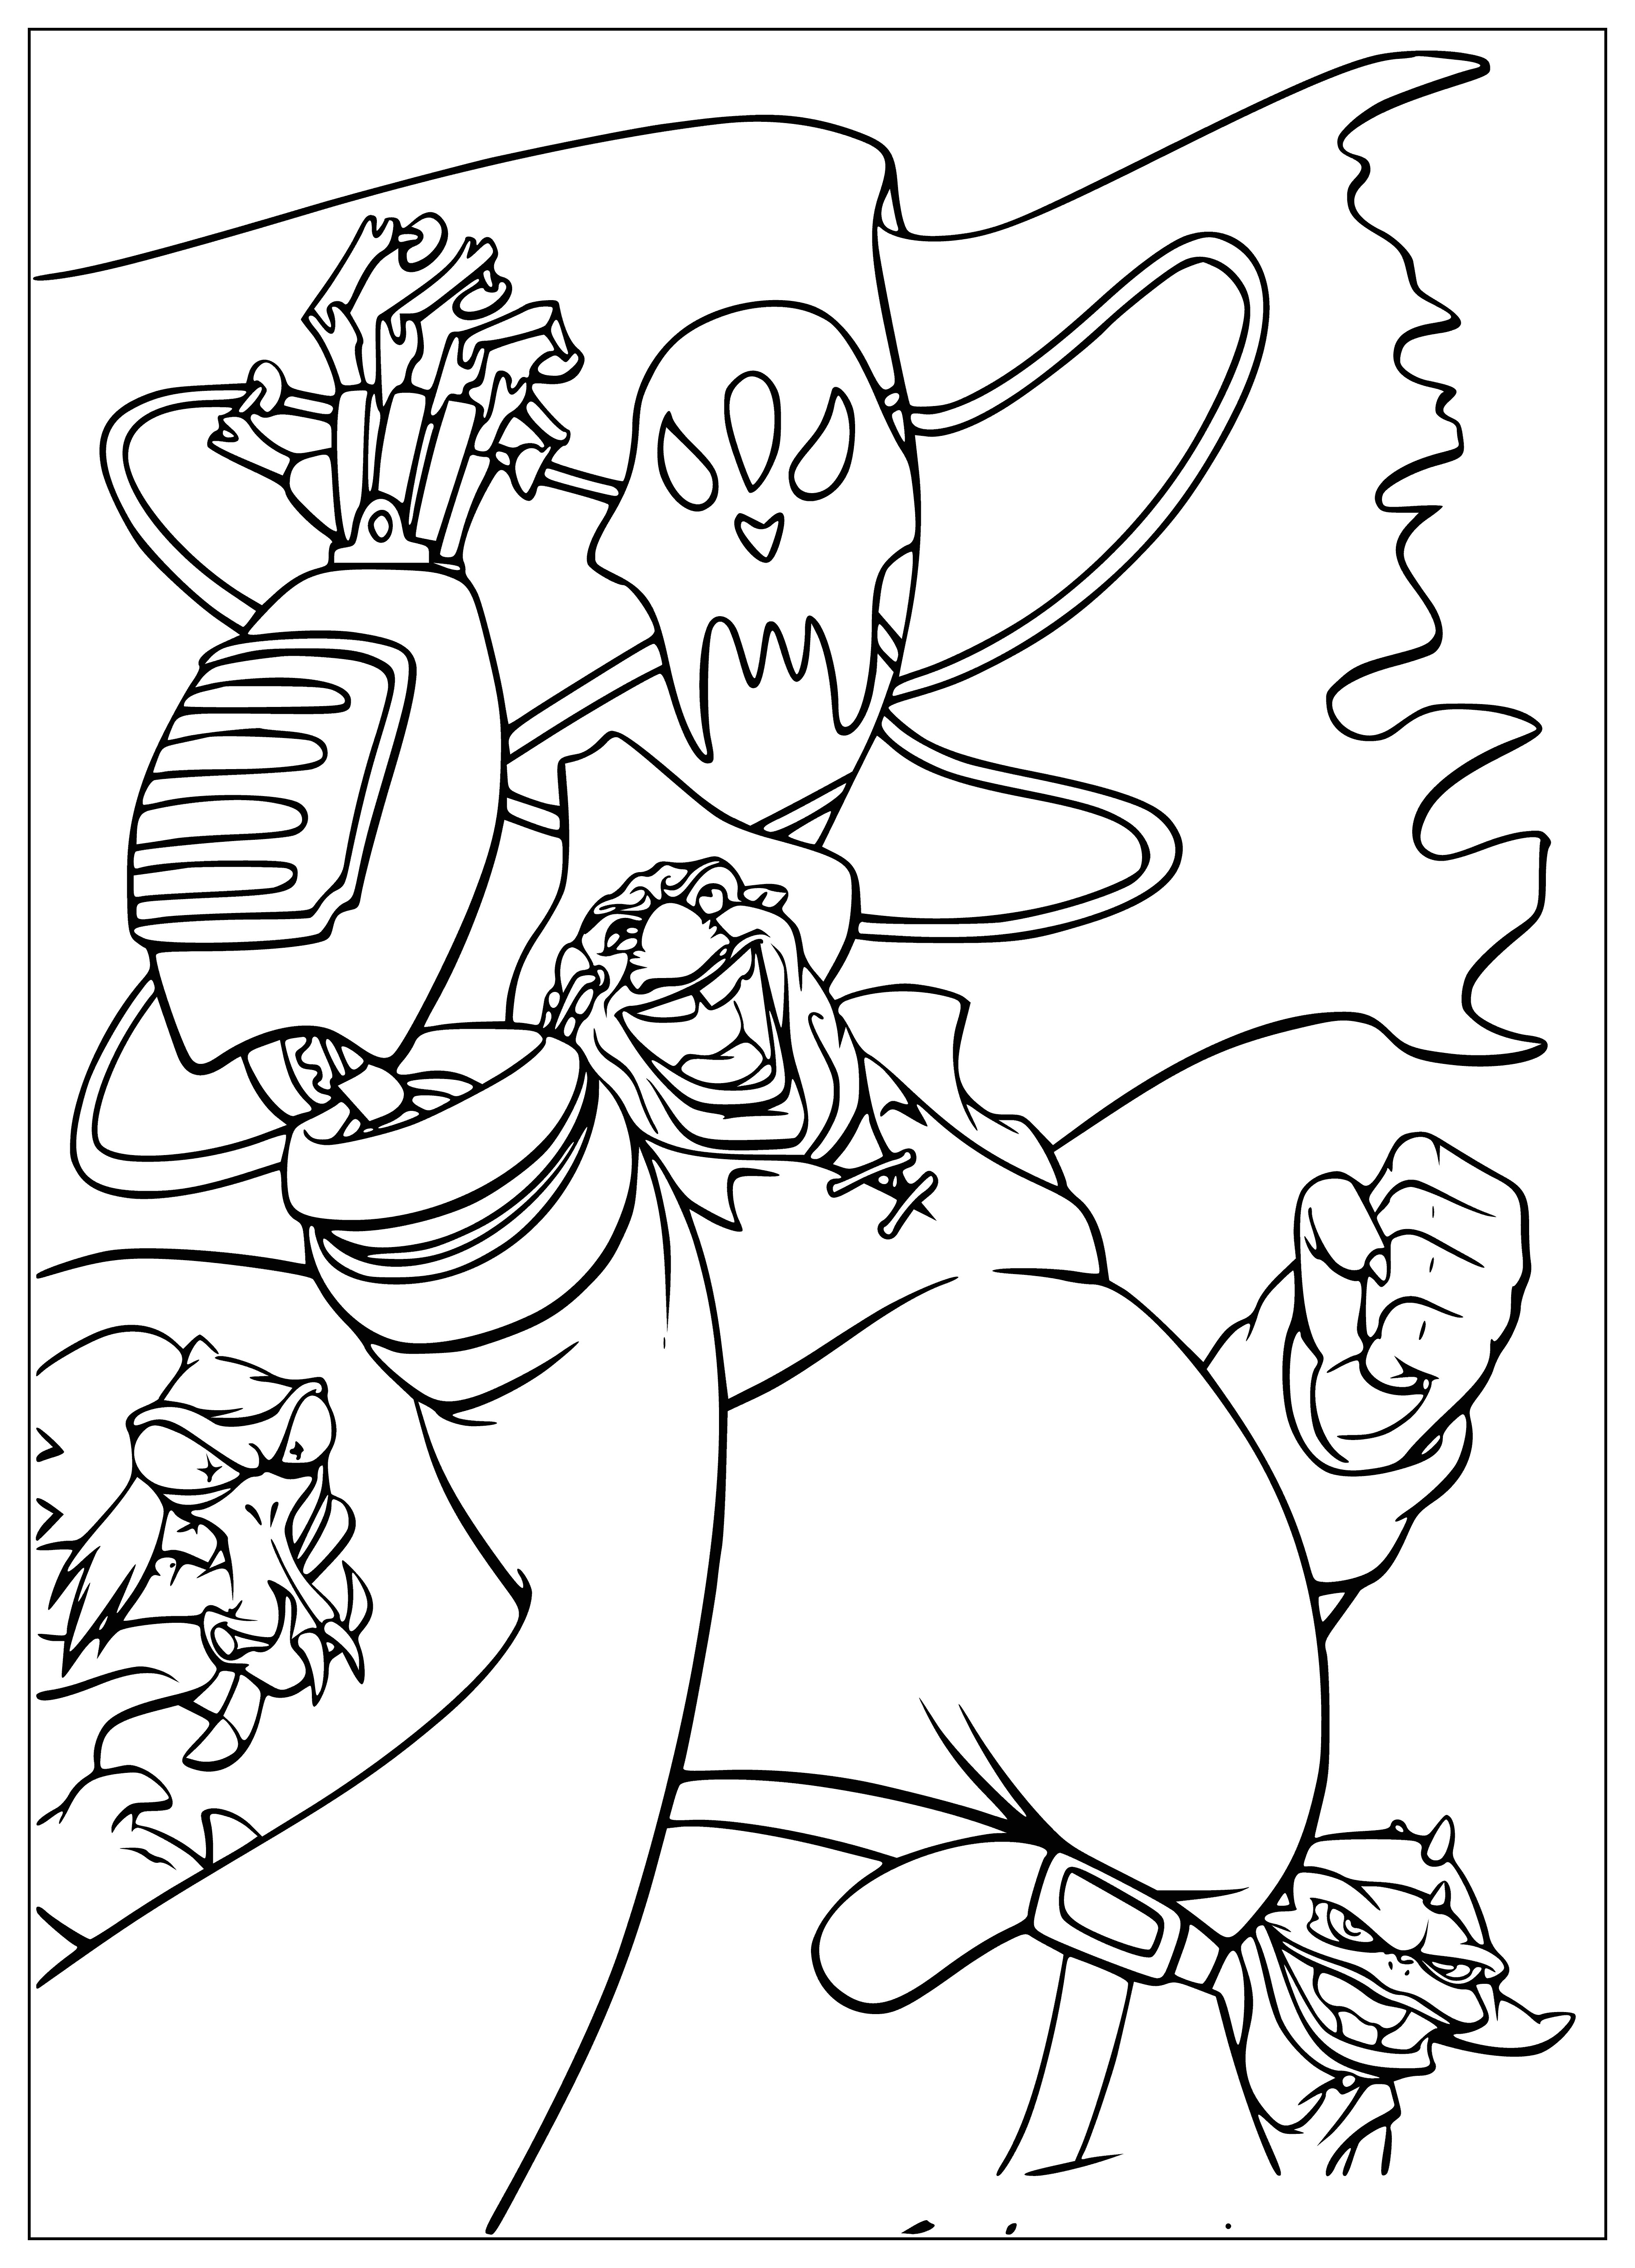 Ship riot coloring page